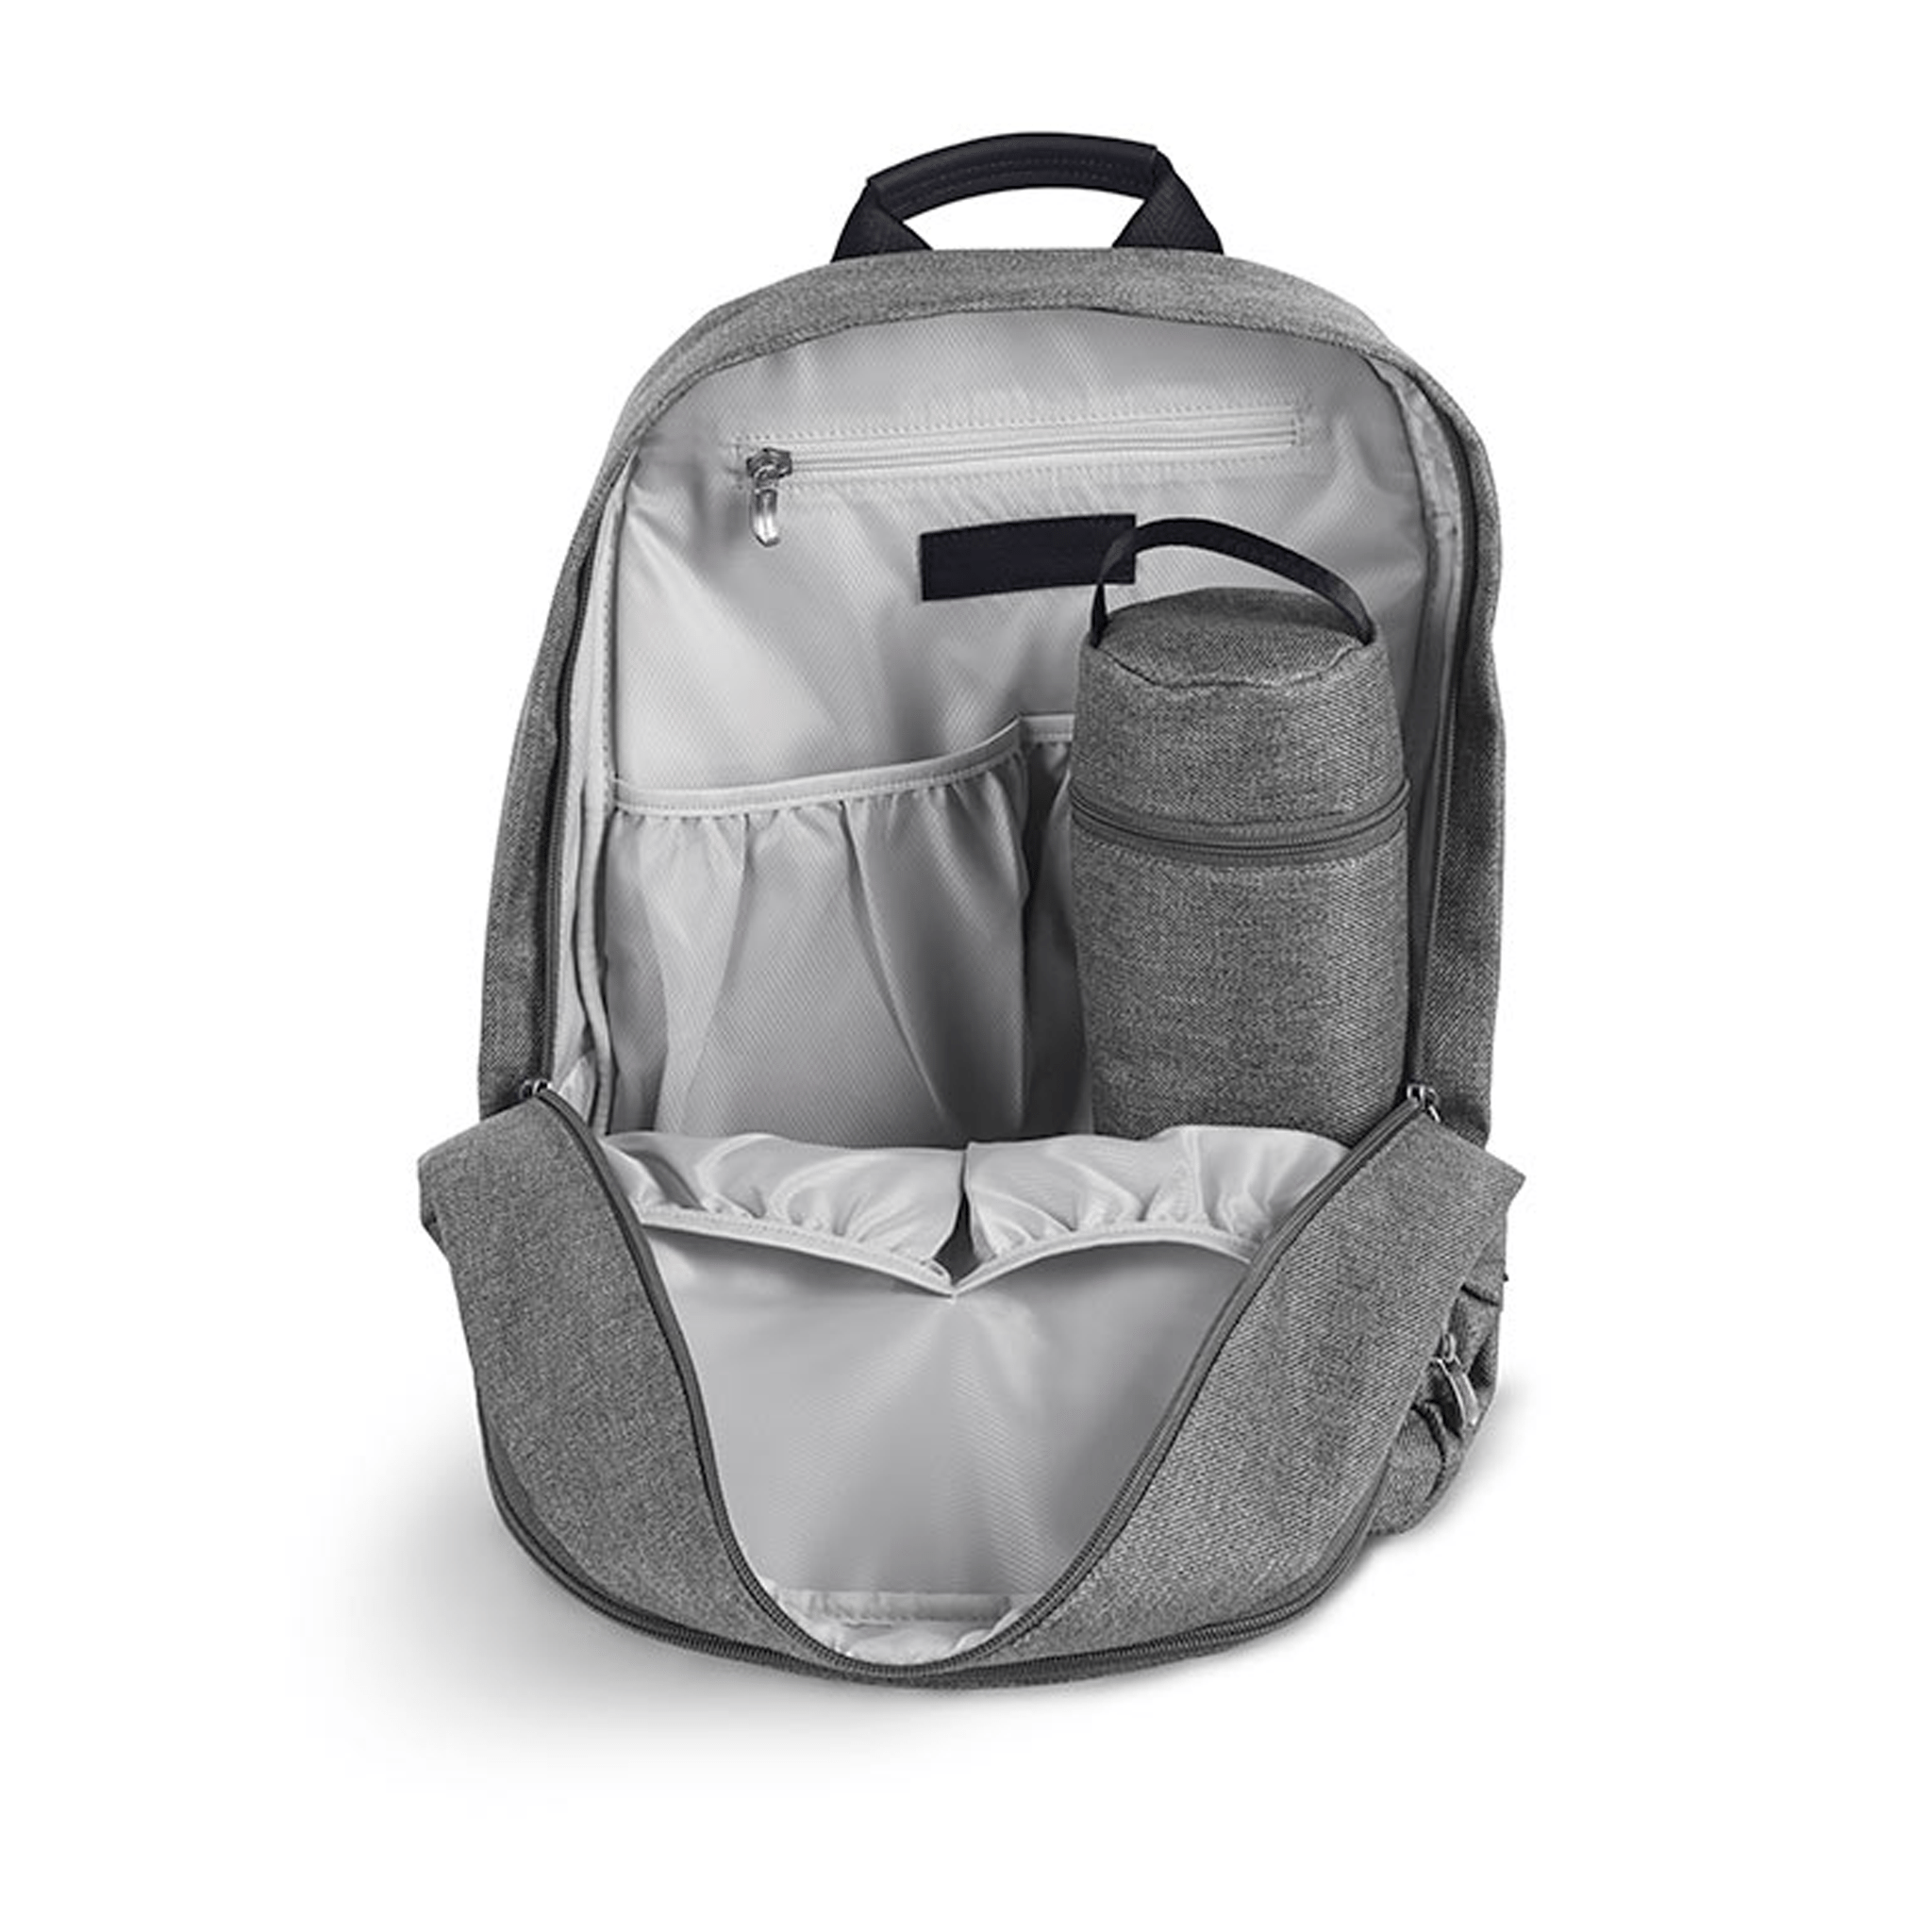 Uppababy changing bags UPPAbaby Changing Backpack Jordan 0919-dpb-ww-jor